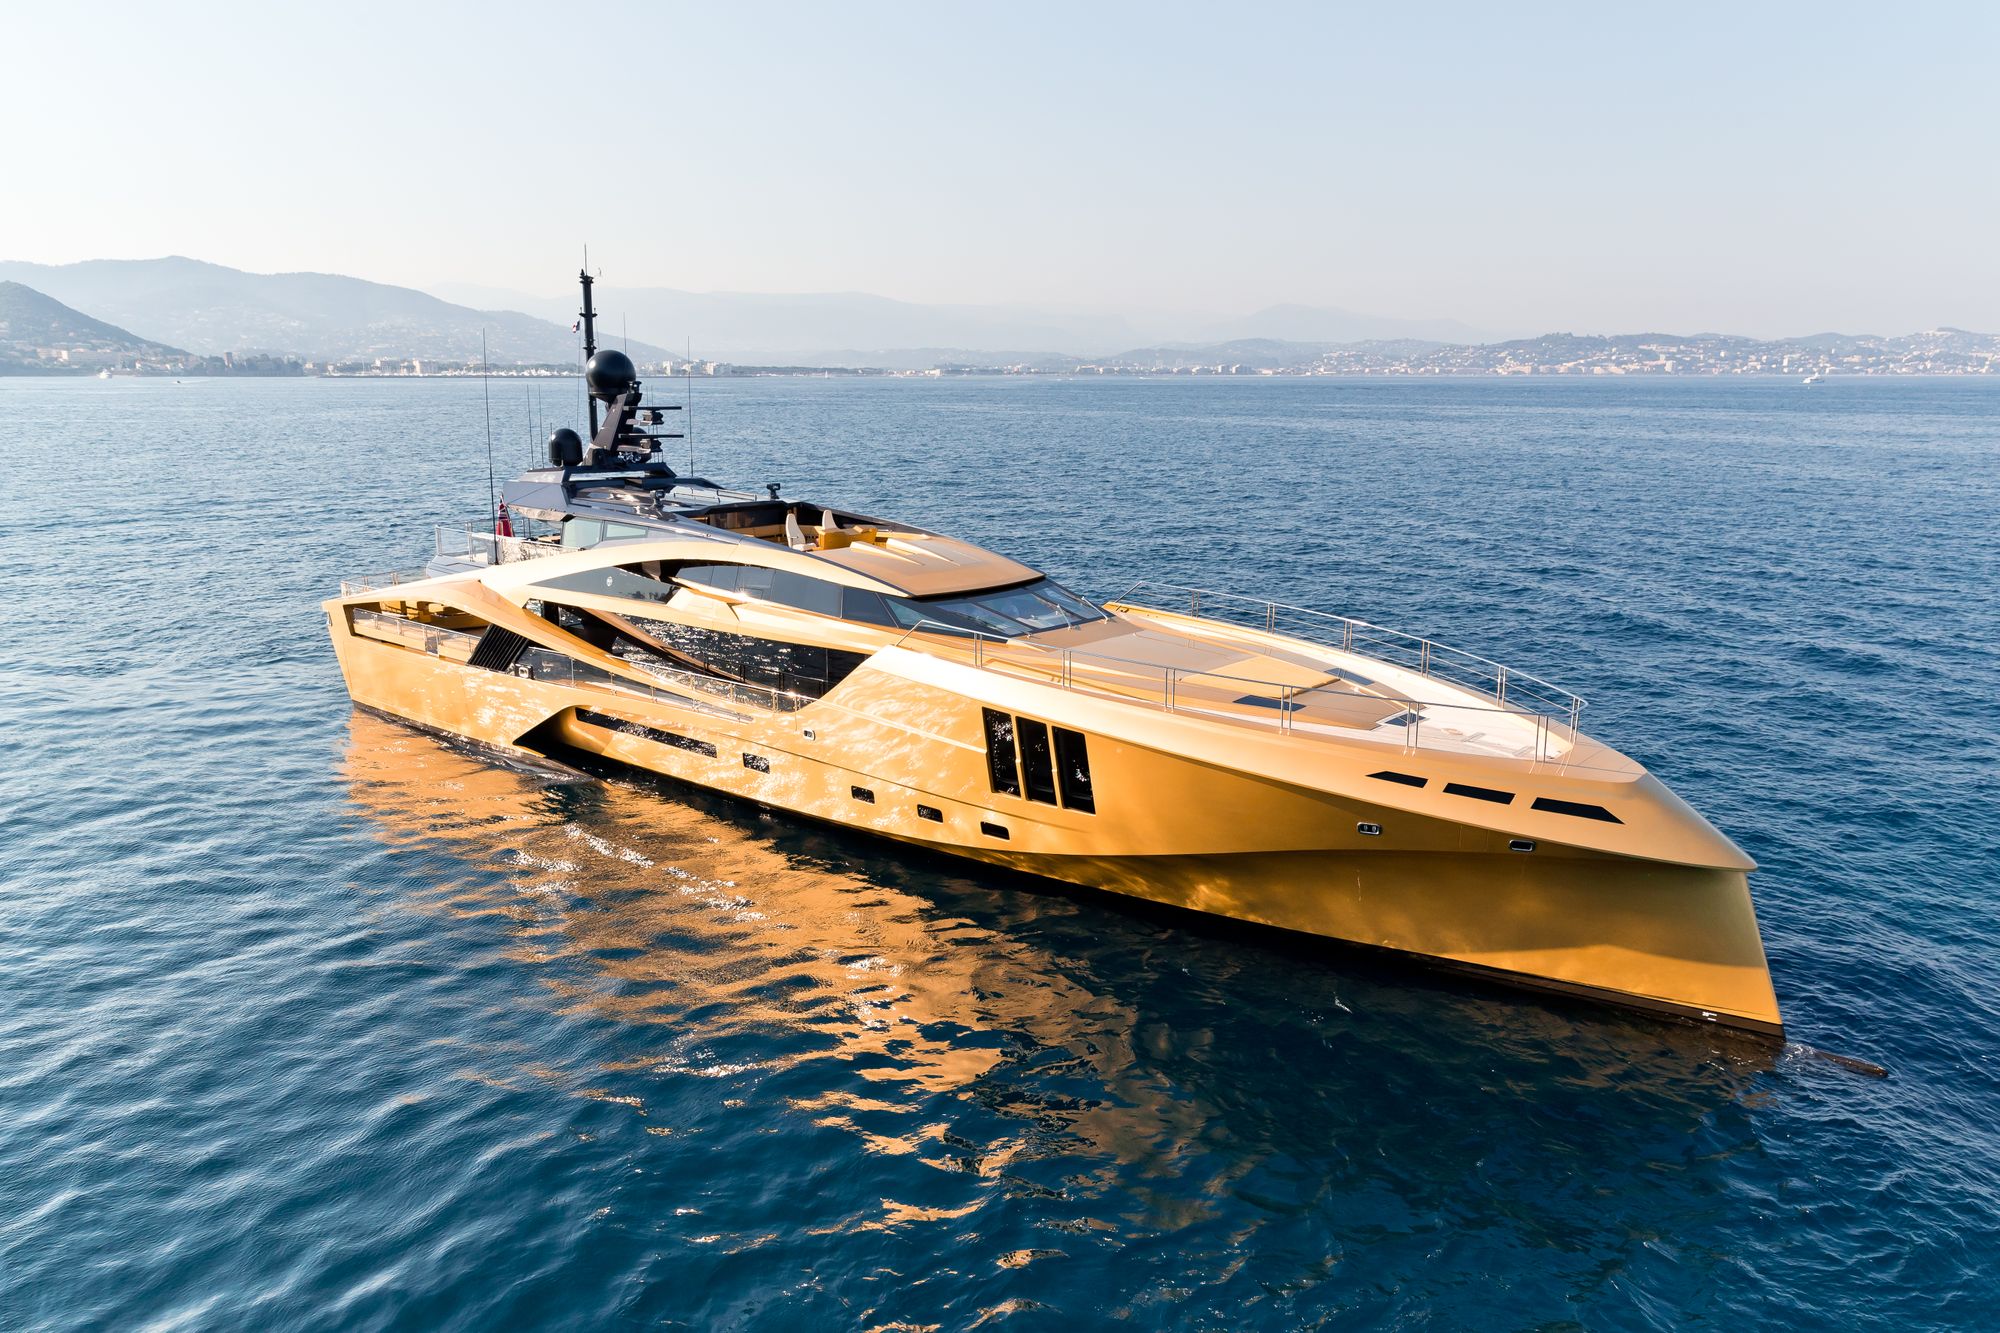 KHALILAH is designed to tick all the boxes of what owners are looking for in a superyacht; she doesn’t compromise on speed, efficiency, comfort, or space.